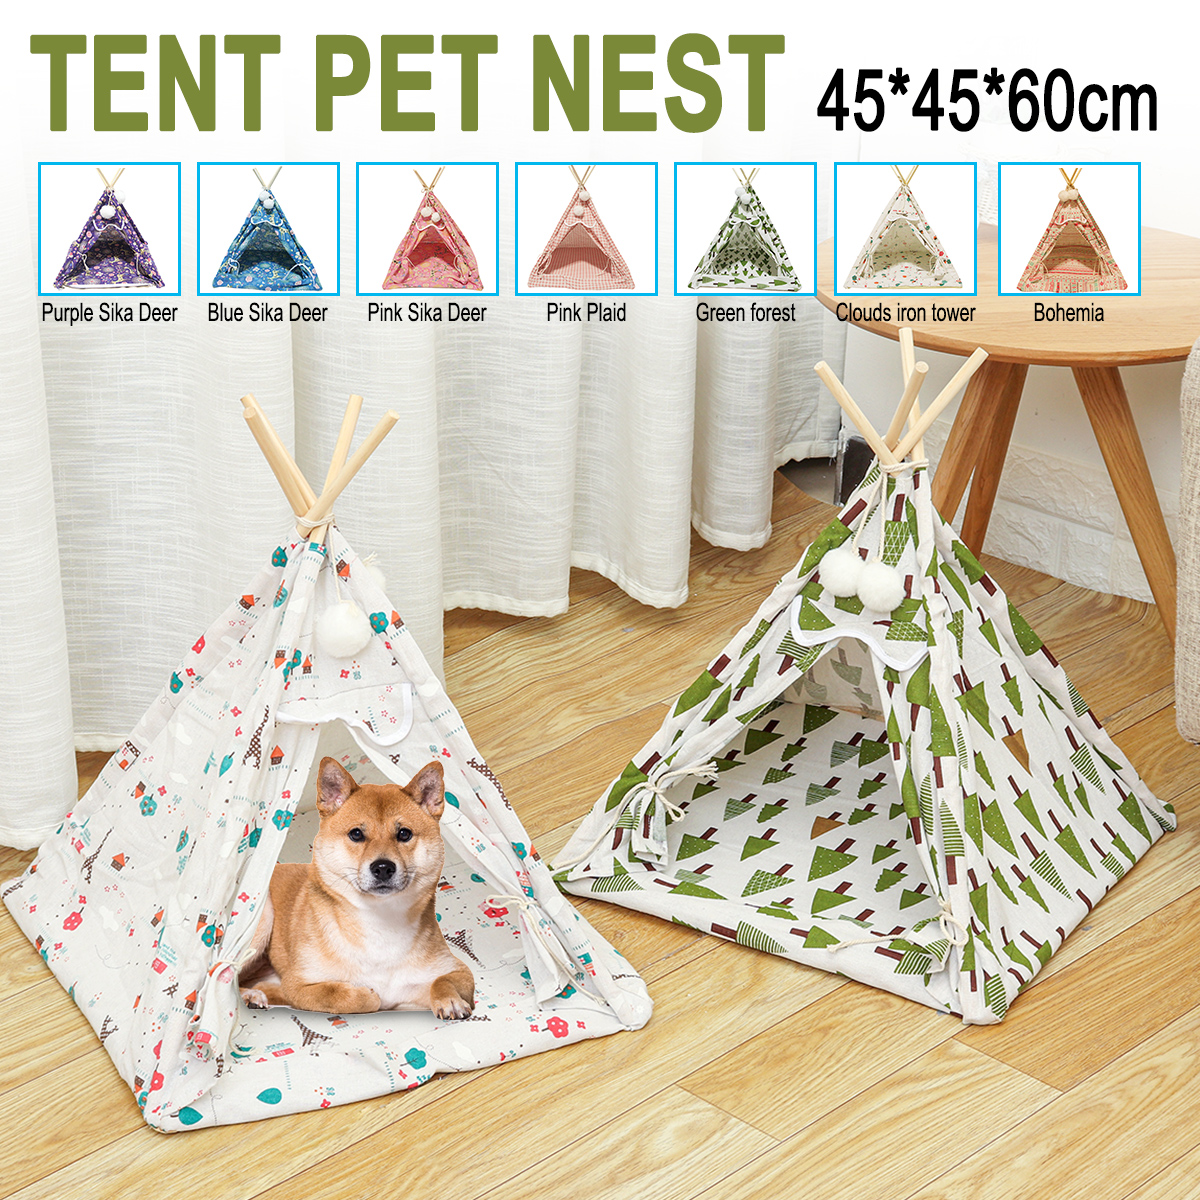 Foldable-Linen-Pet-Bed-Tent-Dog-House-Bed-Washable-Puppy-Cat-Play-Indoor-Teepee-Mat-1691904-1